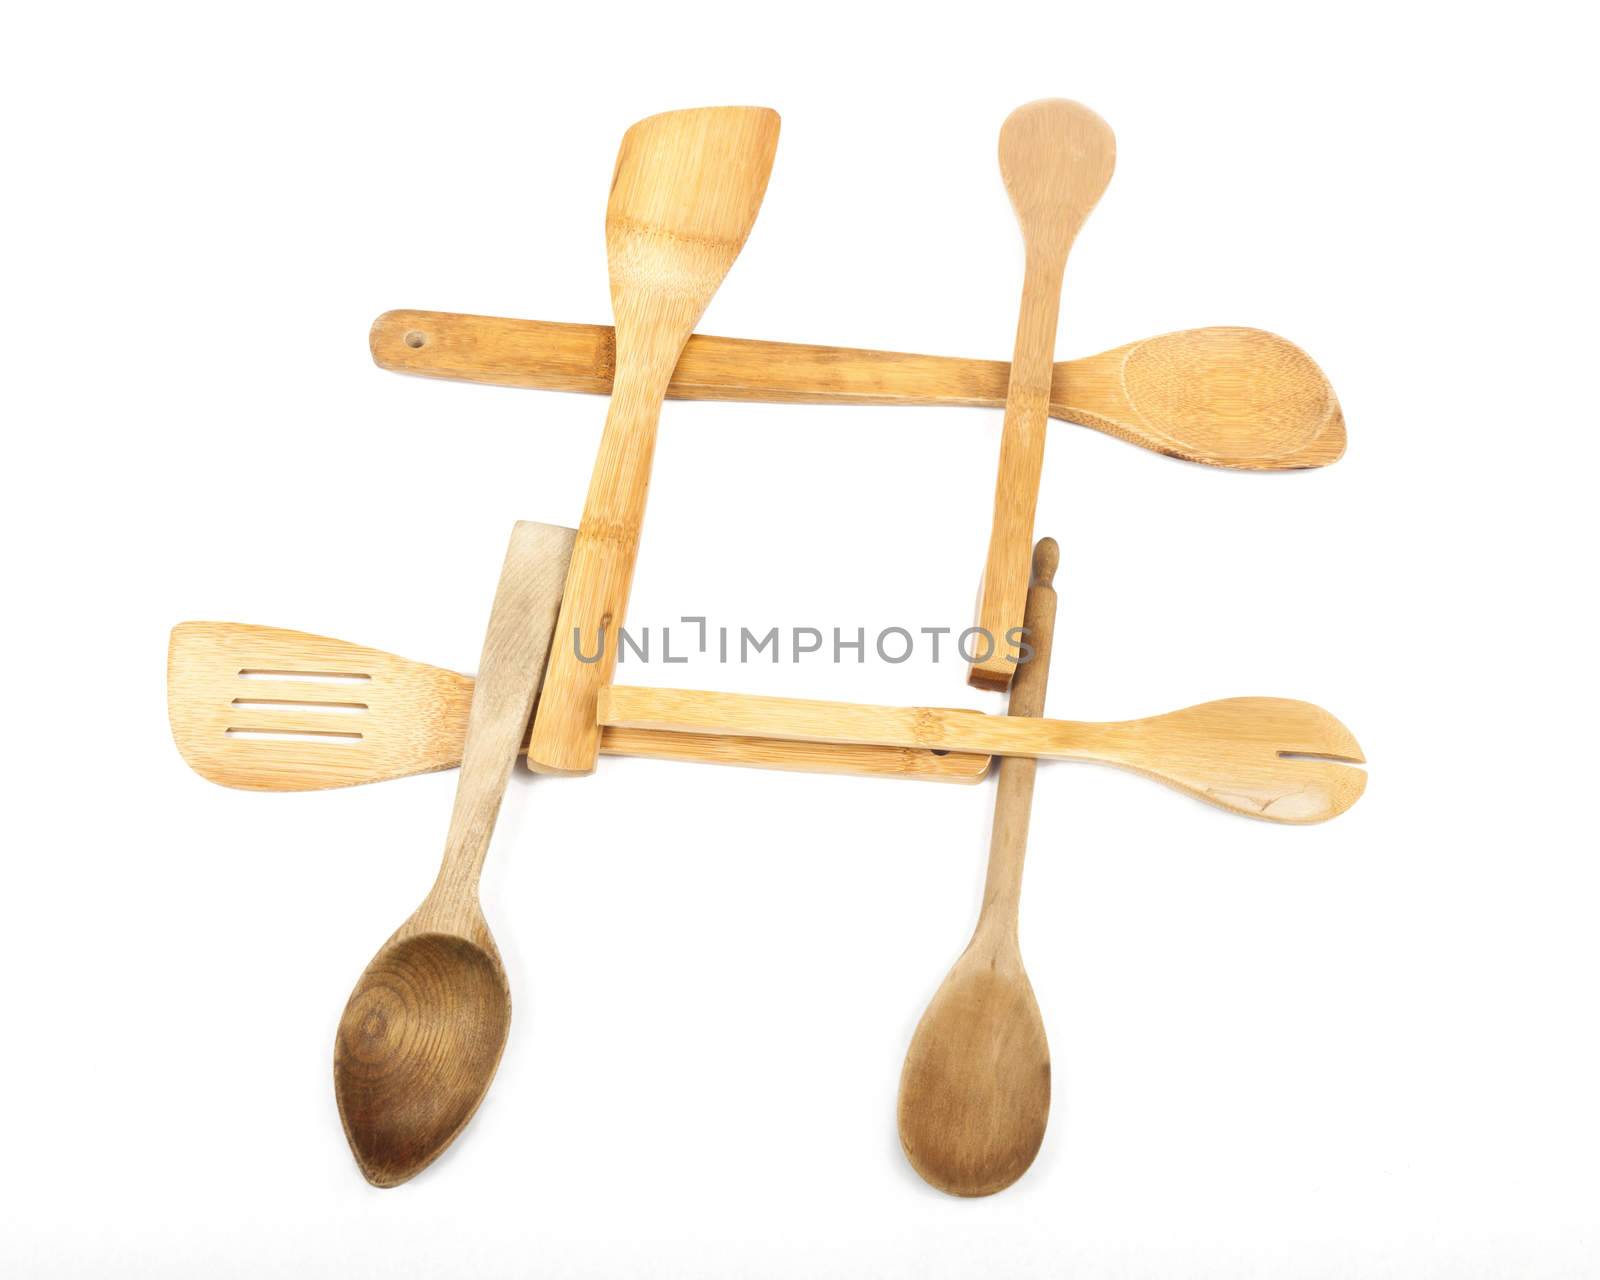 Wooden Spoon Hashtag by mothy20